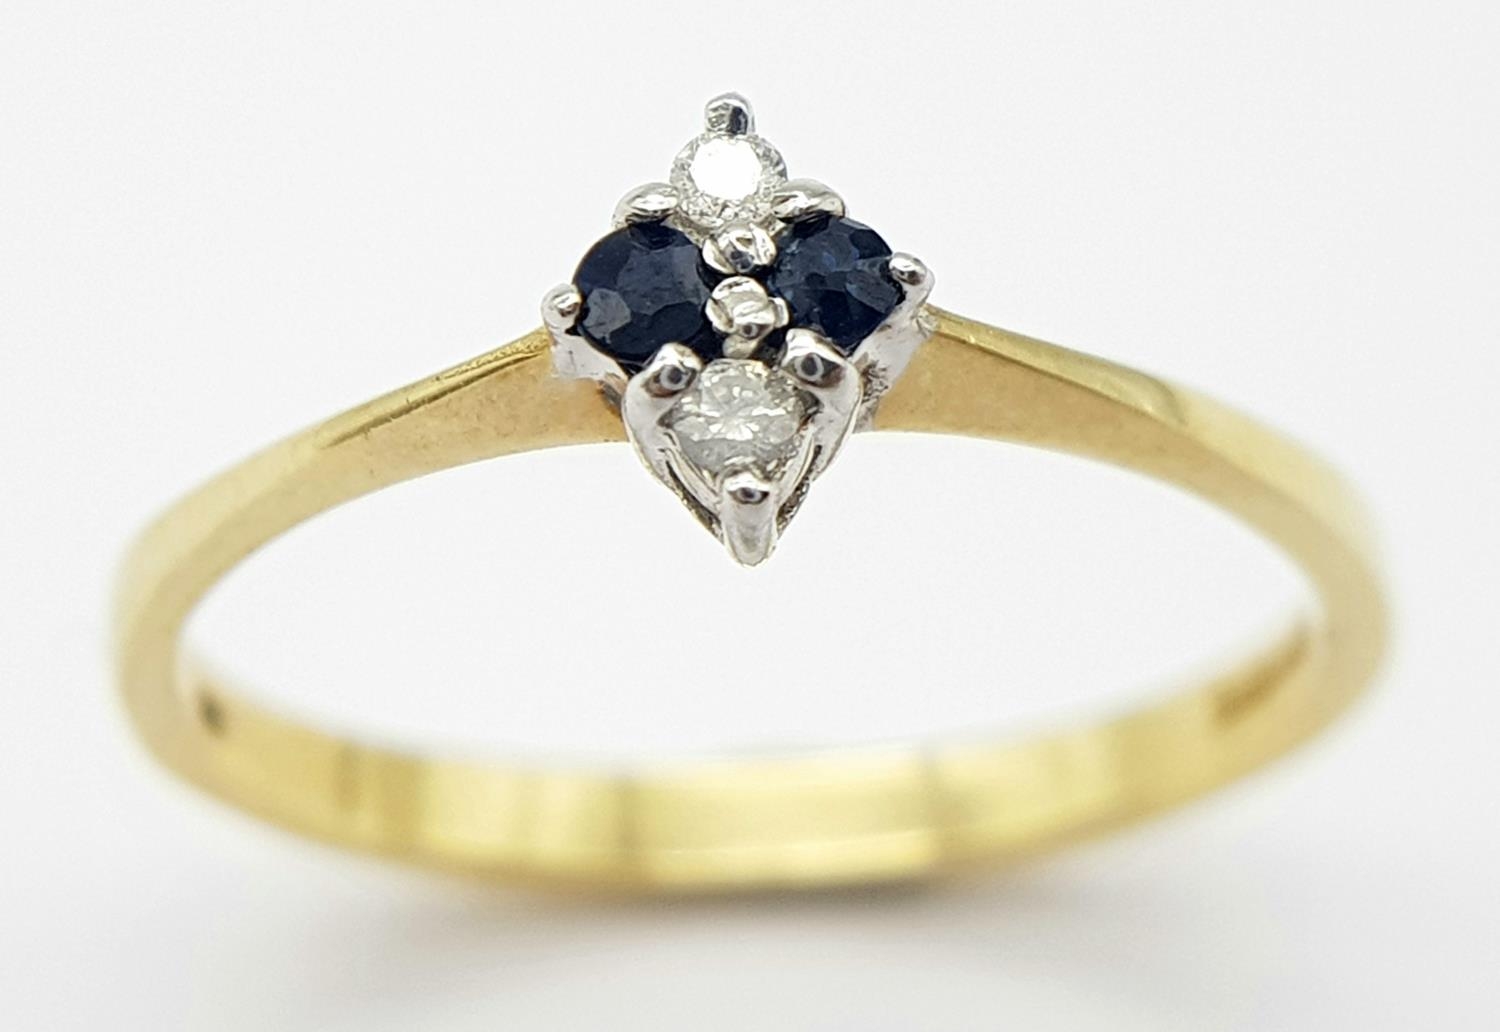 A 9K YELLOW GOLD DIAMOND & SAPPHIRE RING 1.4G SIZE O 1/2. ref: SPAS 9018 - Image 2 of 5